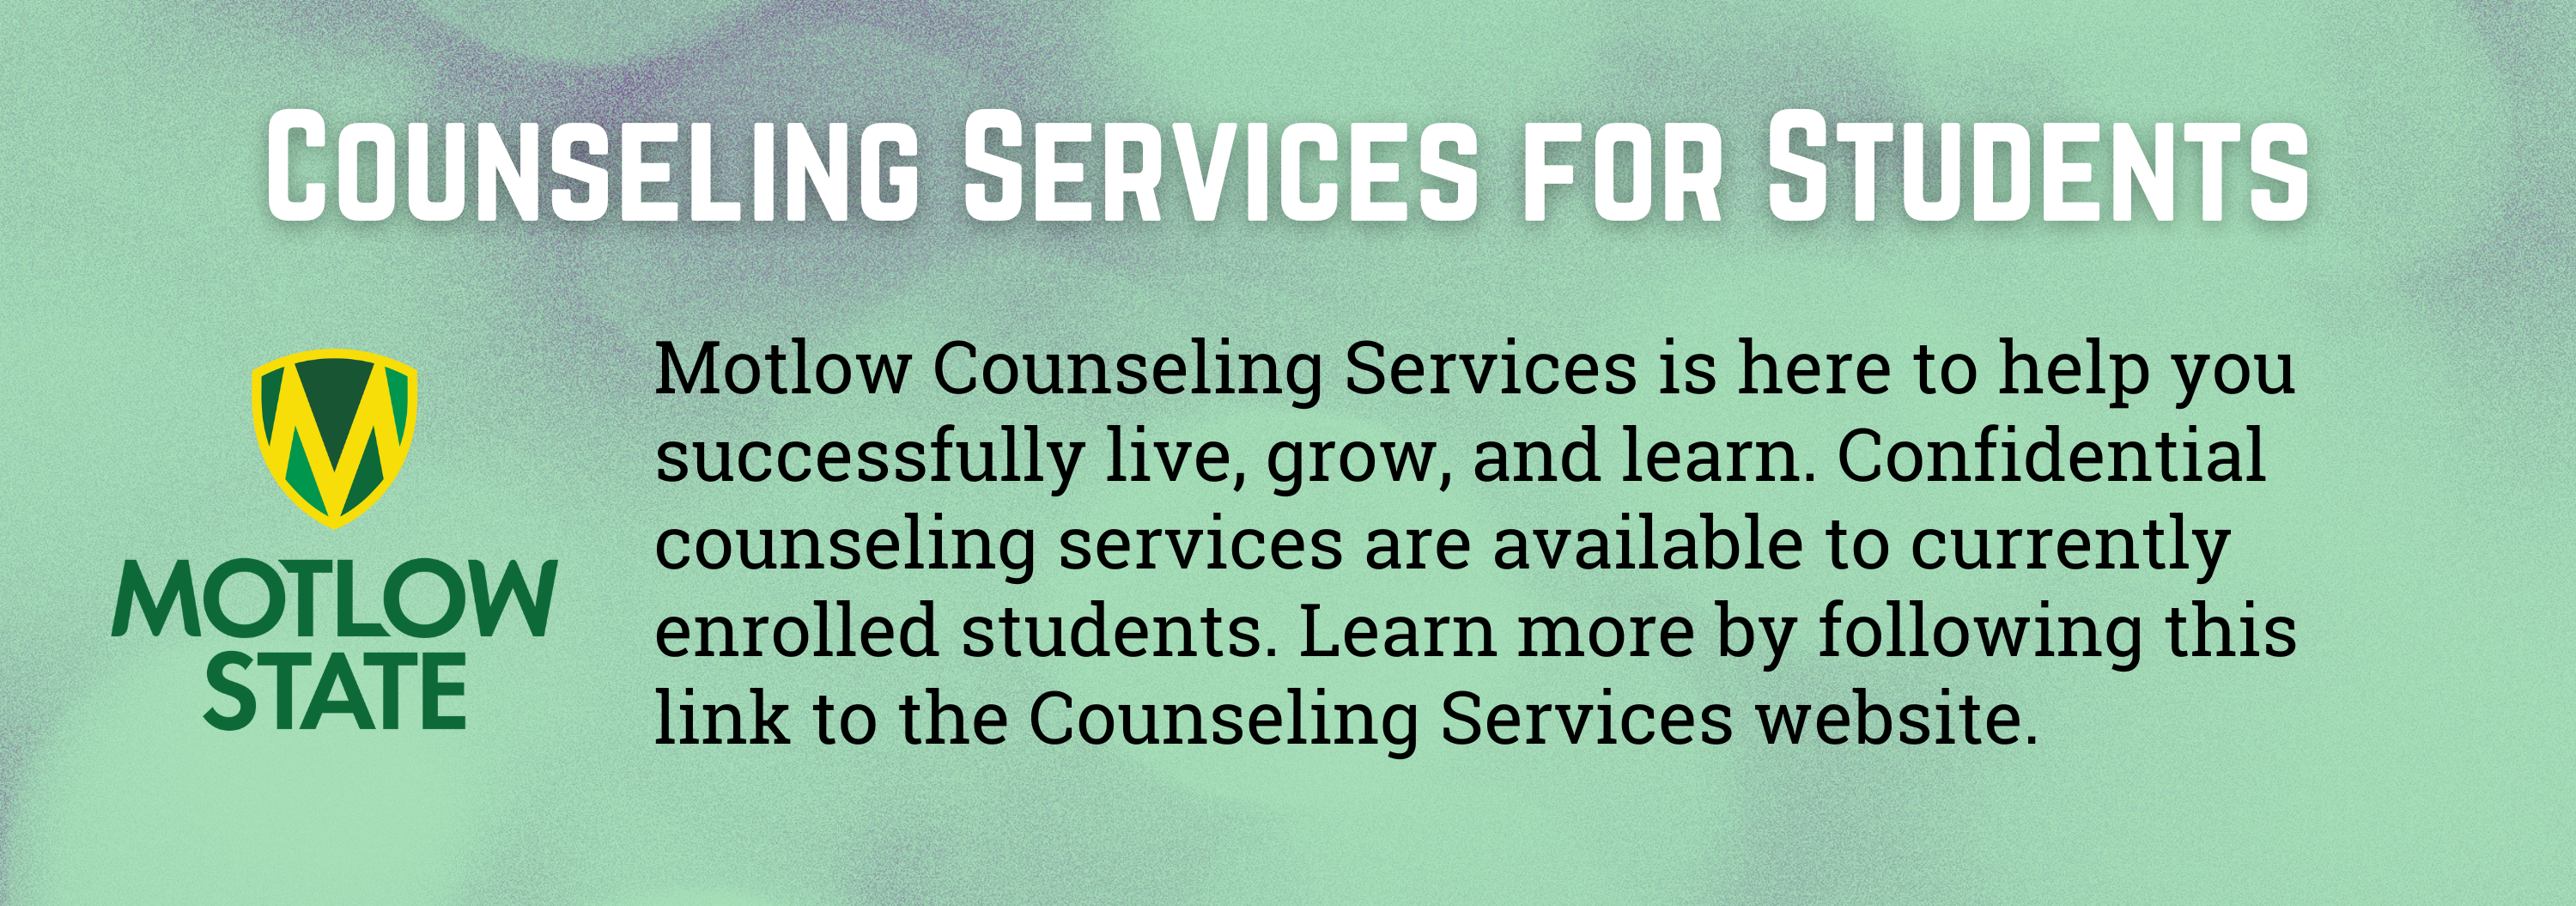 Motlow Counseling Services